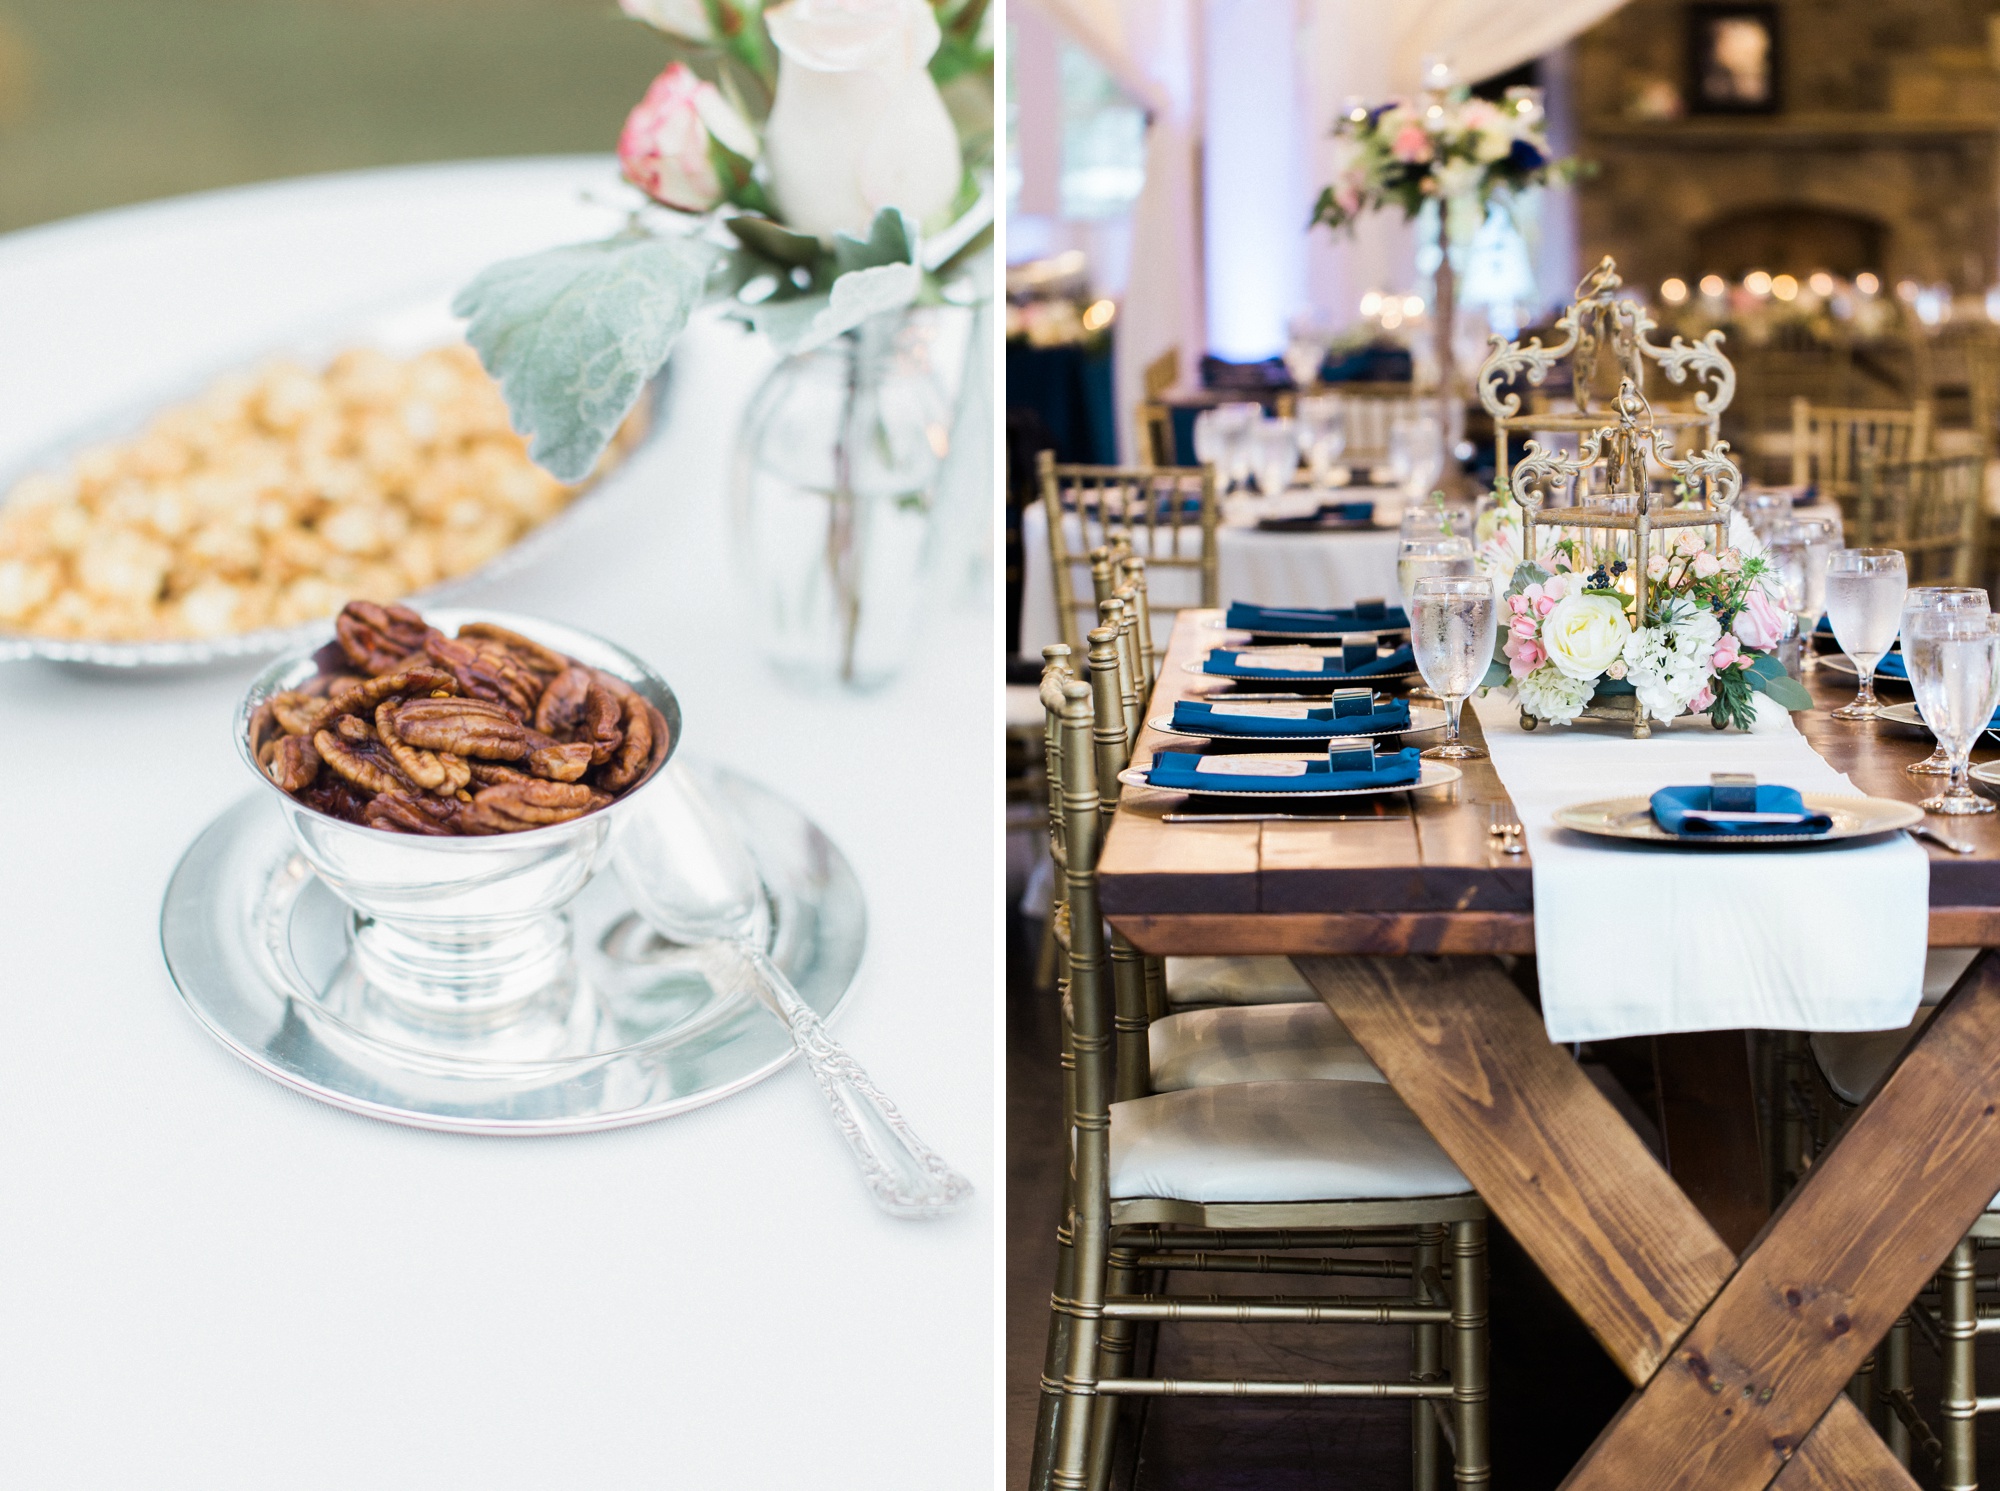 From cocktail hour to your reception, Little River Farms provides exceptional quality and service!